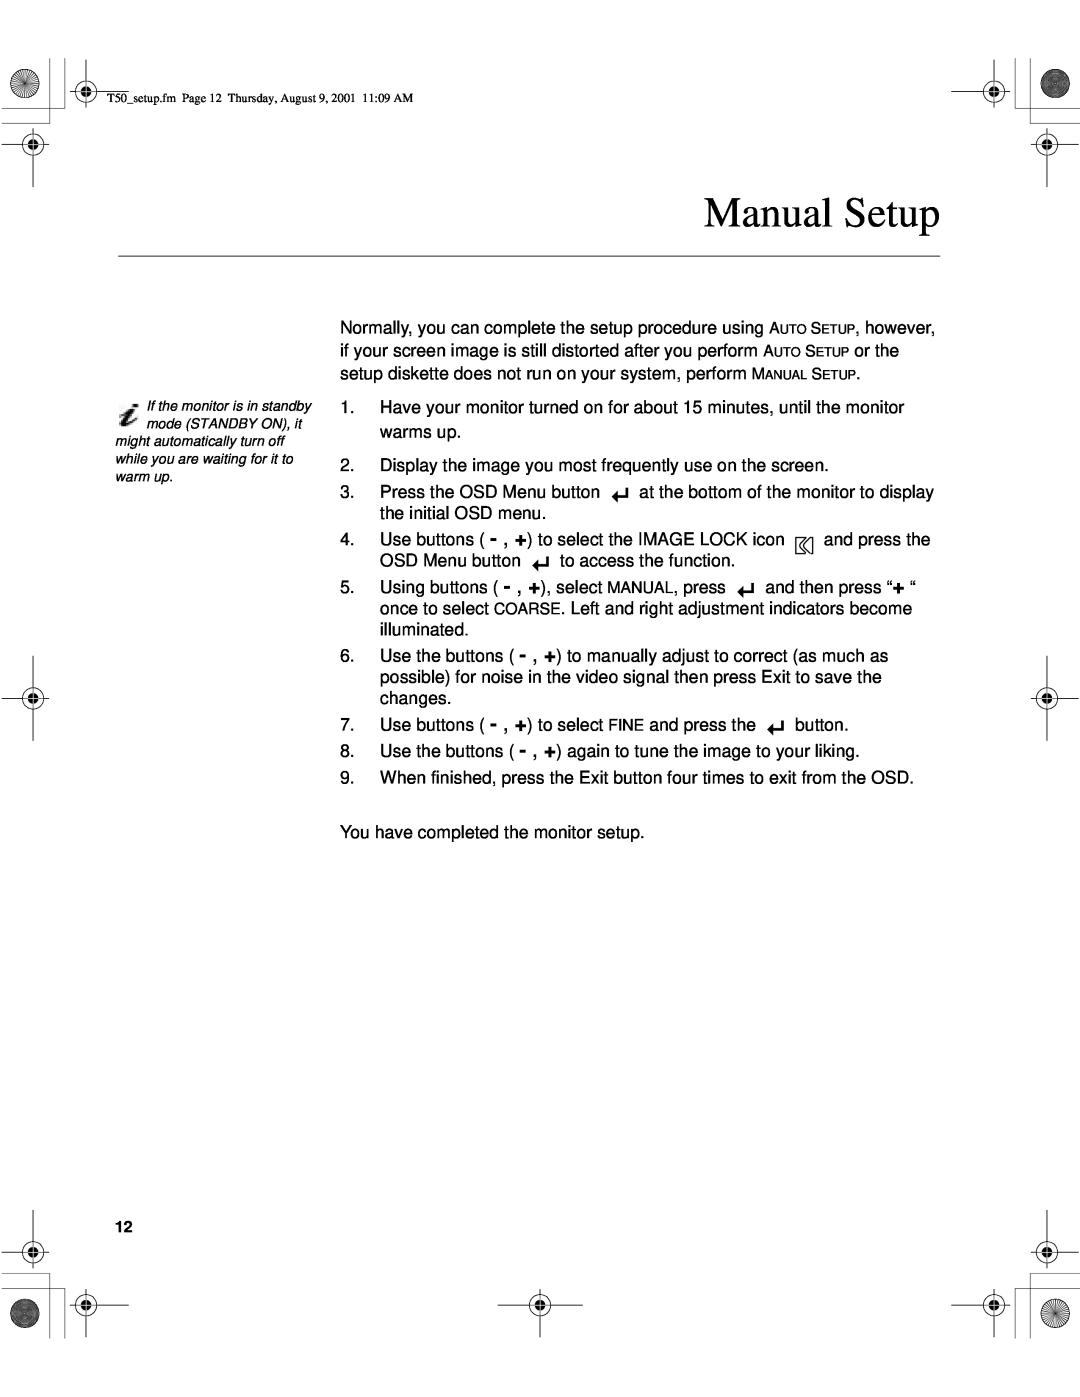 IBM 9511-AWC, T50, 9511-AGC, 31P6260 manual Manual Setup, might automatically turn off while you are waiting for it to warm up 